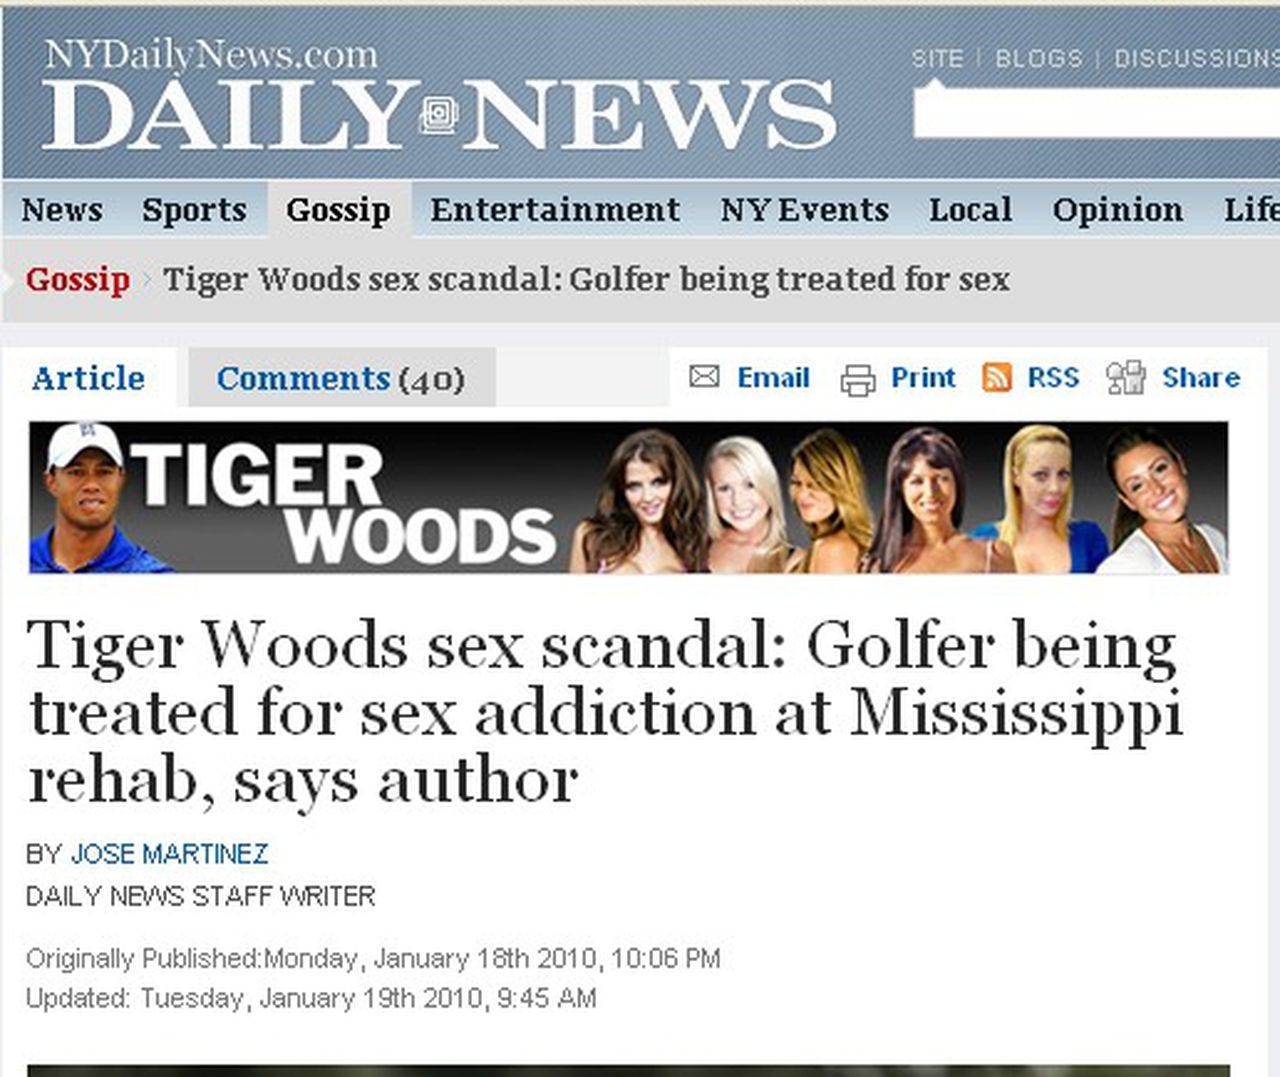 Tiger Woods in Mississippi latest: Daily News says it's true; gossip  blogger claims he's debunked rumor - al.com